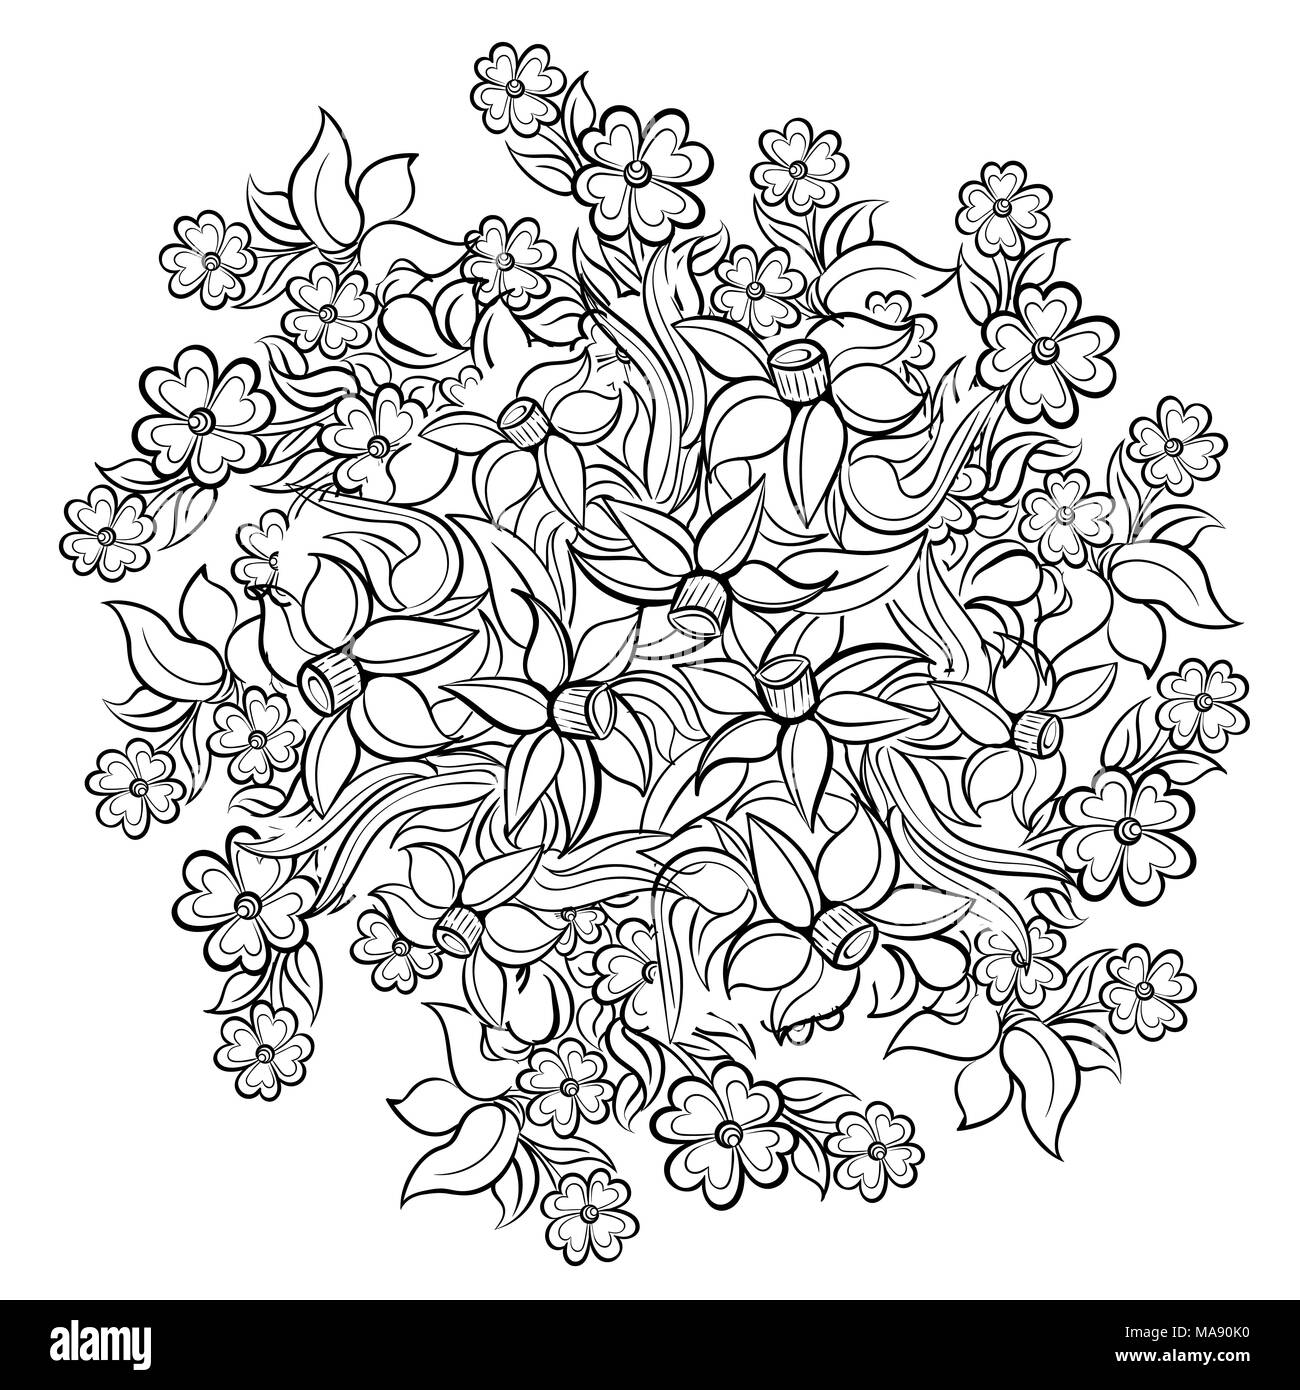 Flower Tattoo Stencils Vector Images over 1900